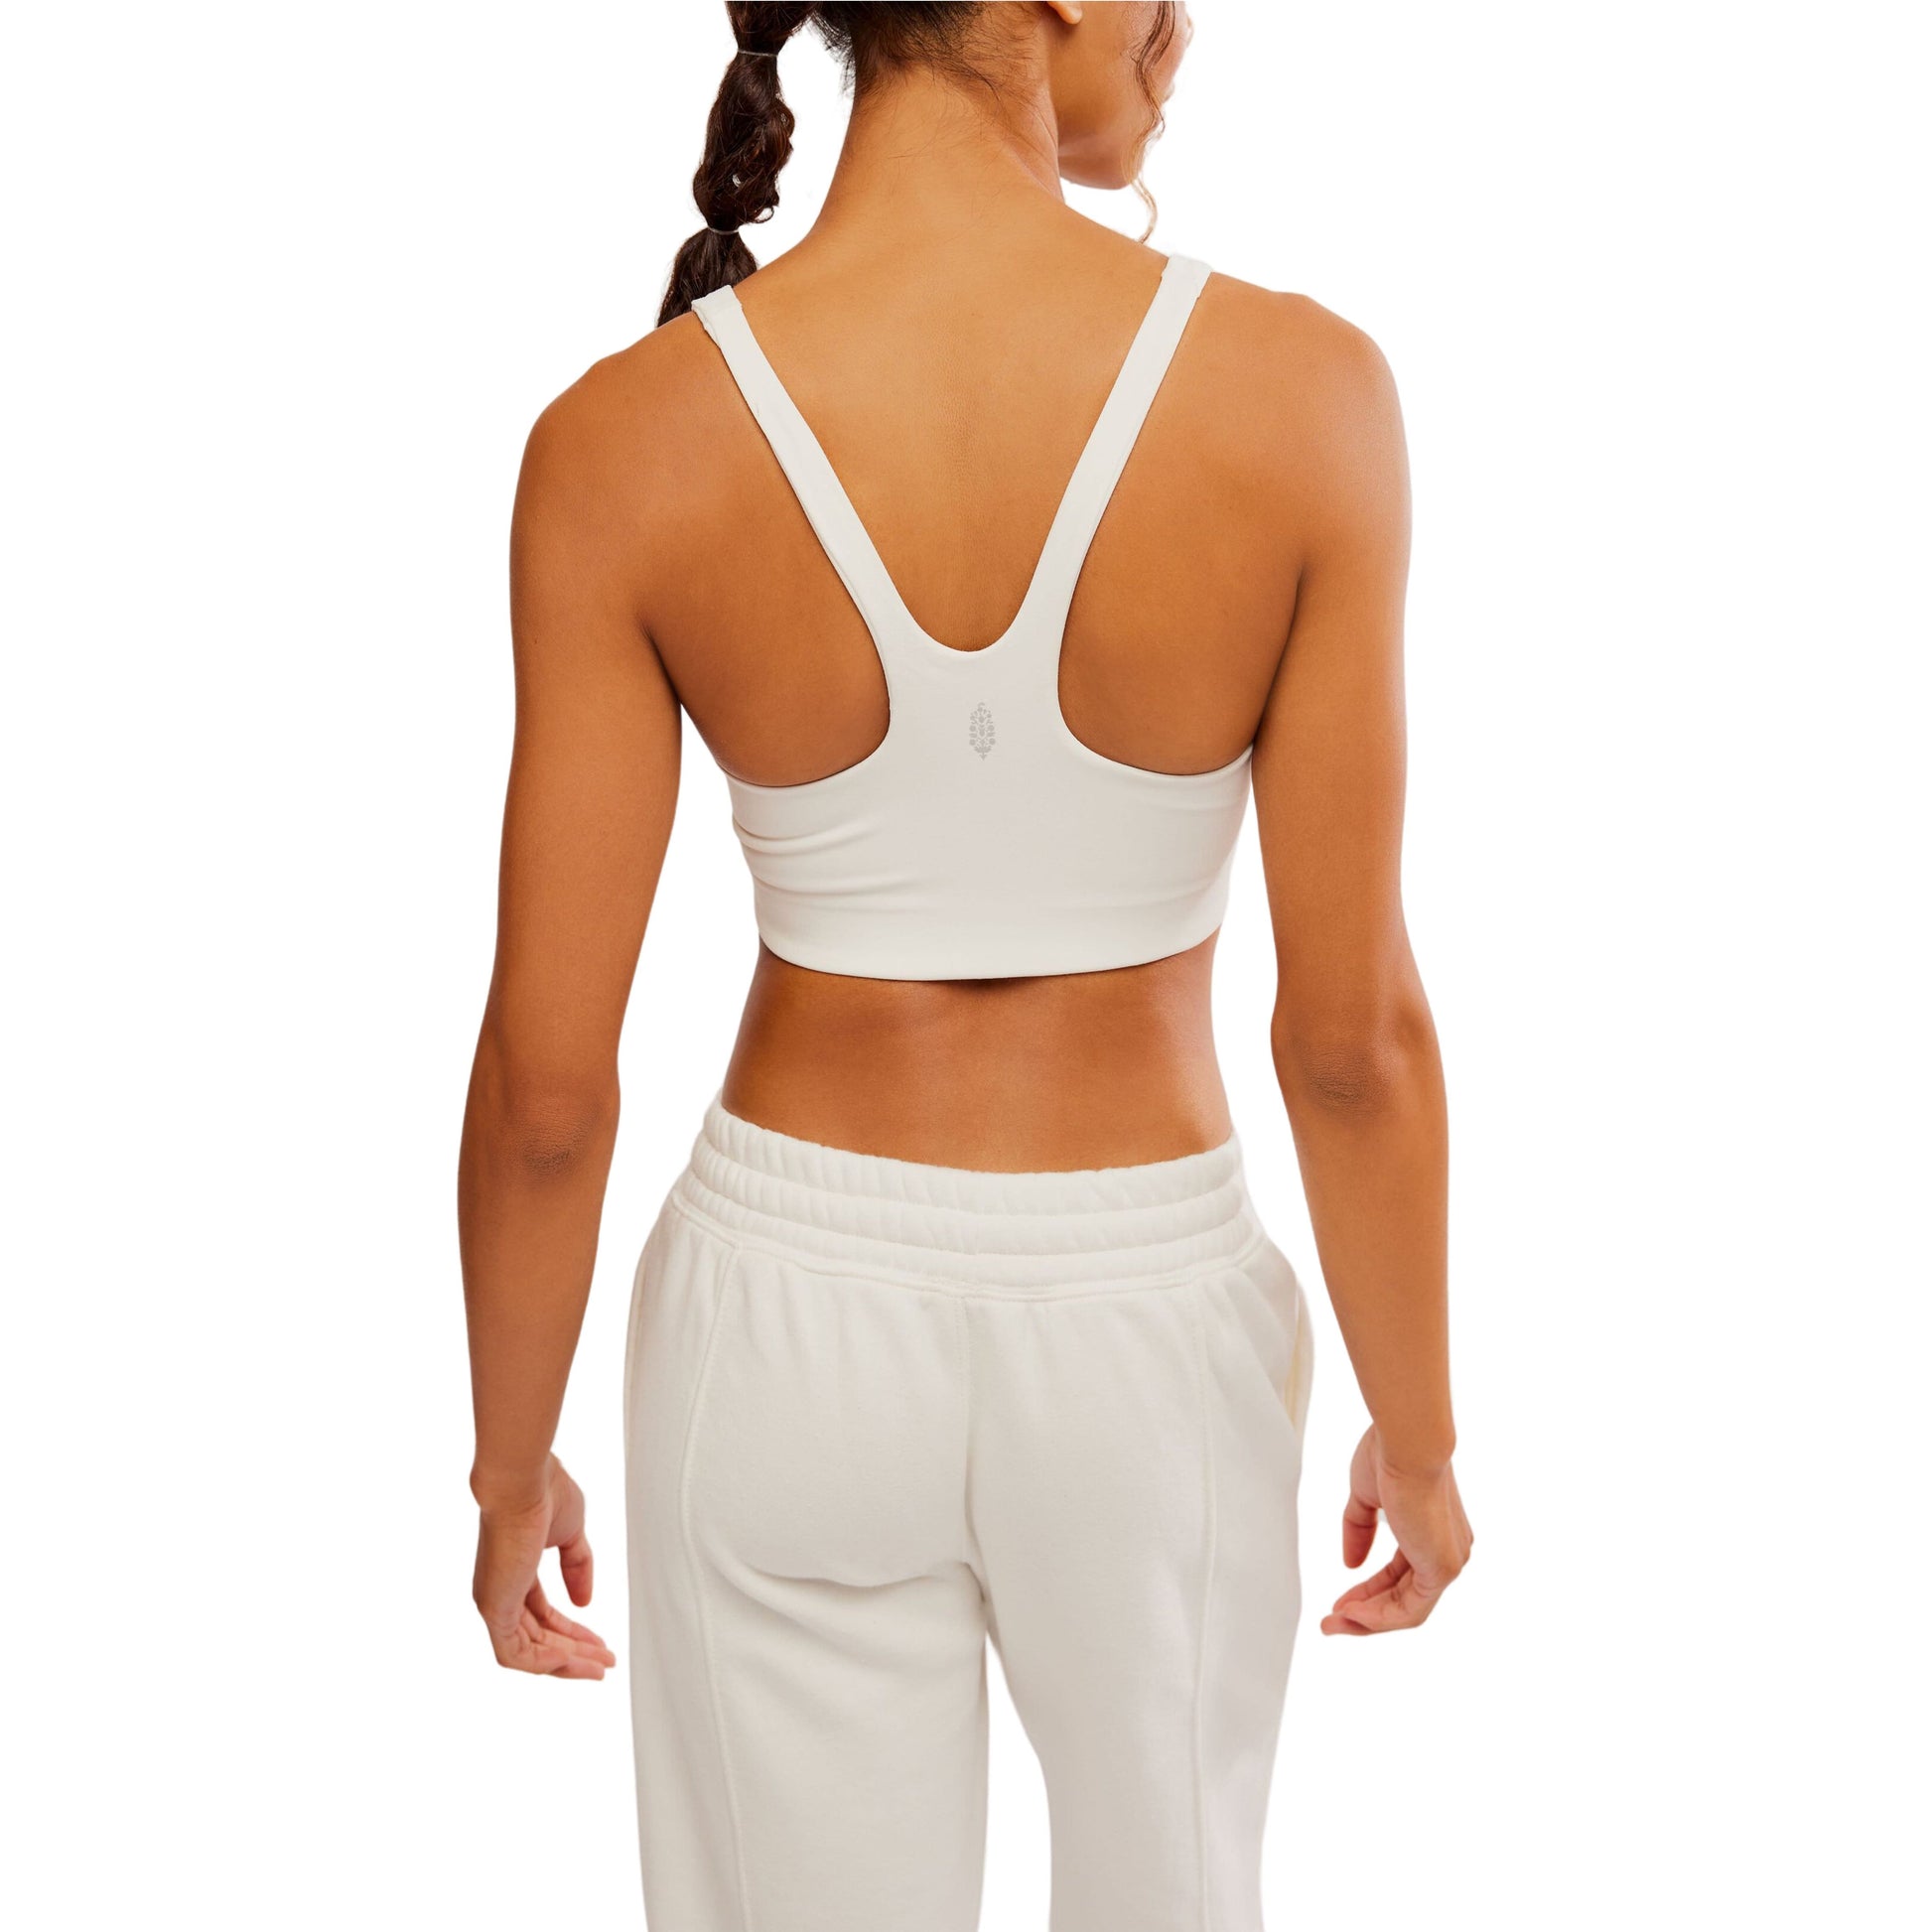 Rear view of a woman wearing a Free People Movement Never Better SQ Neck Bra in White and sweatpants, isolated on a white background.